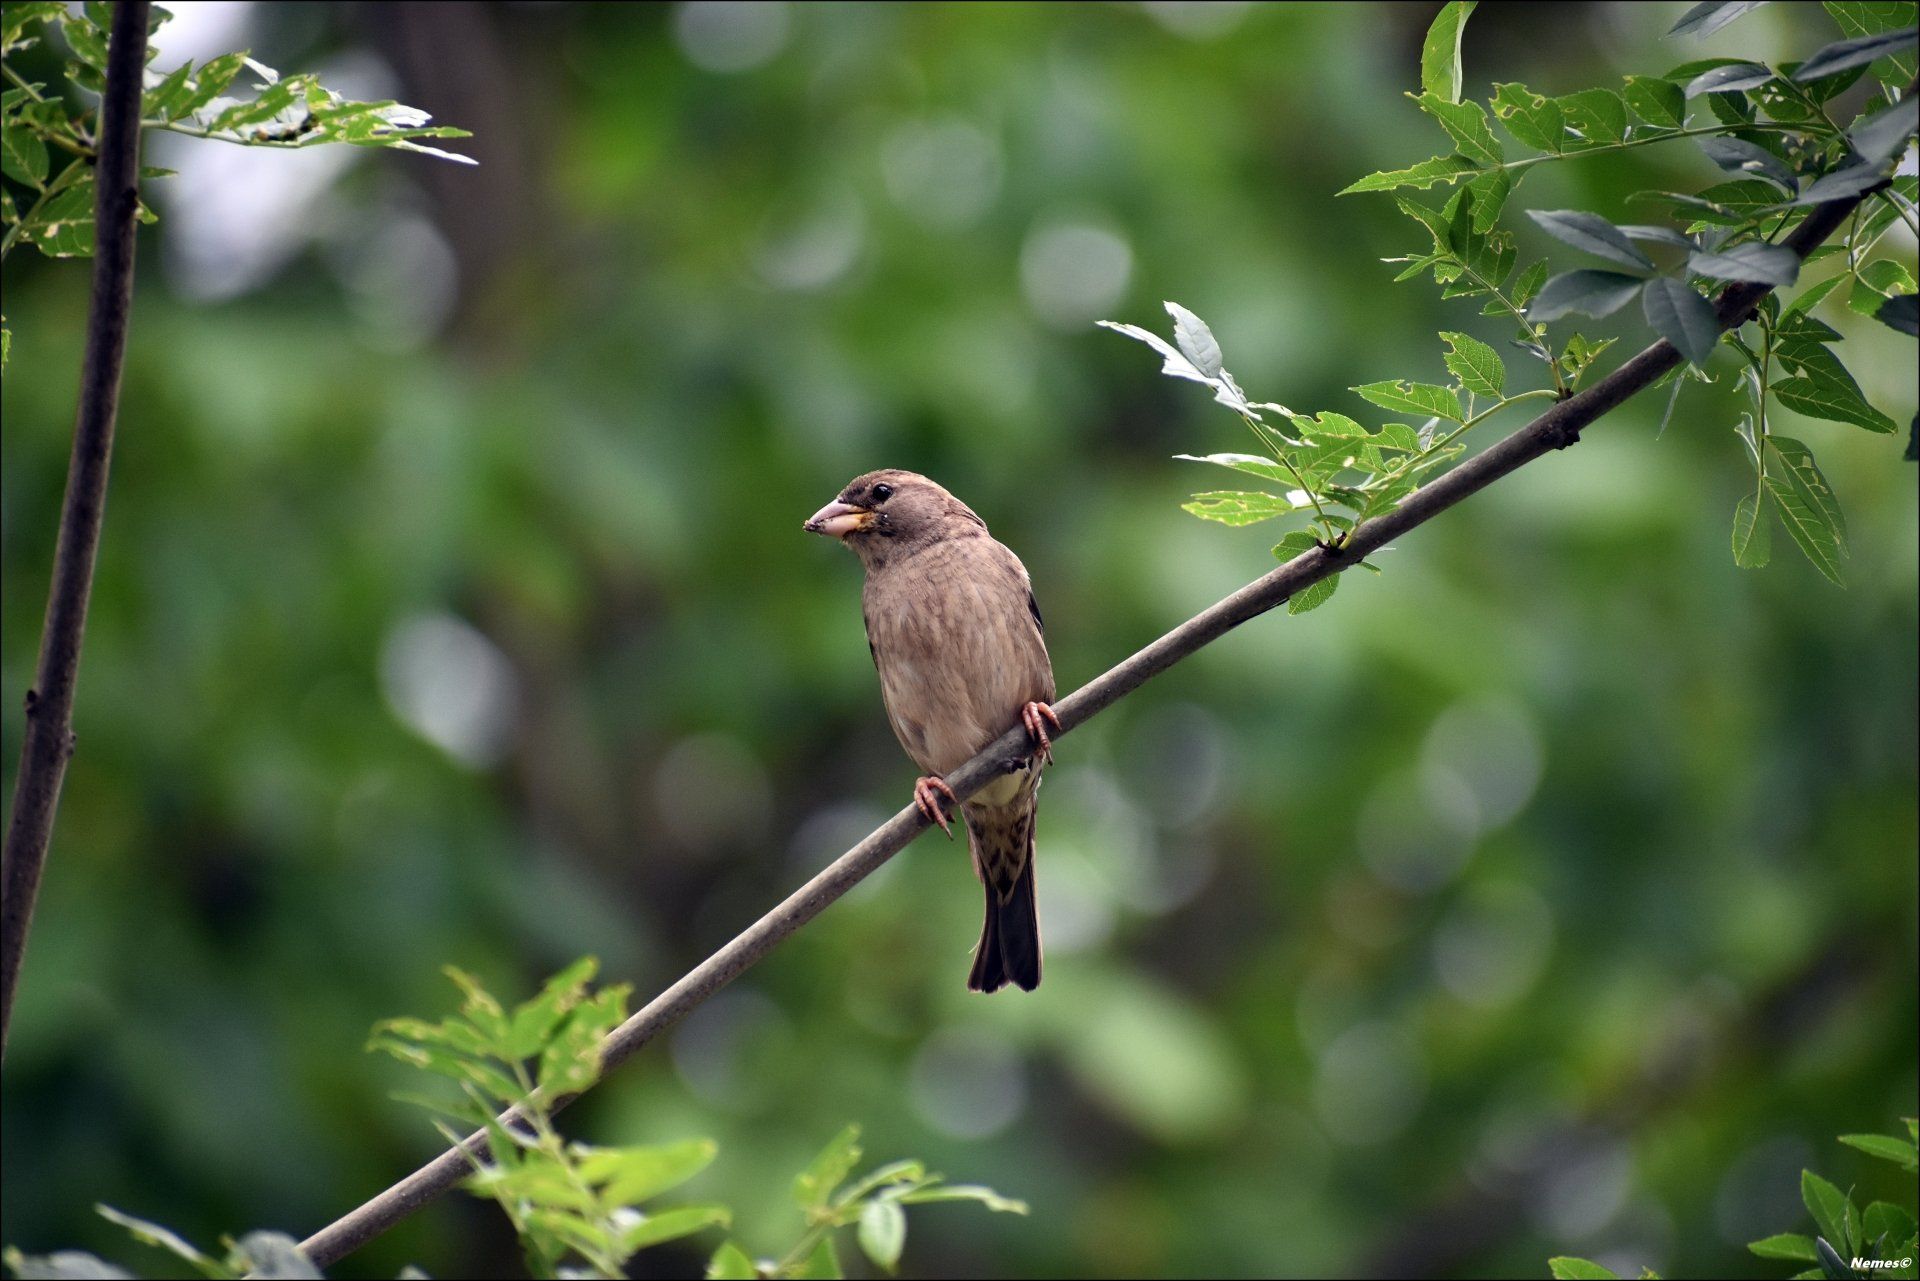 A small bird perched on a wire in a tree.